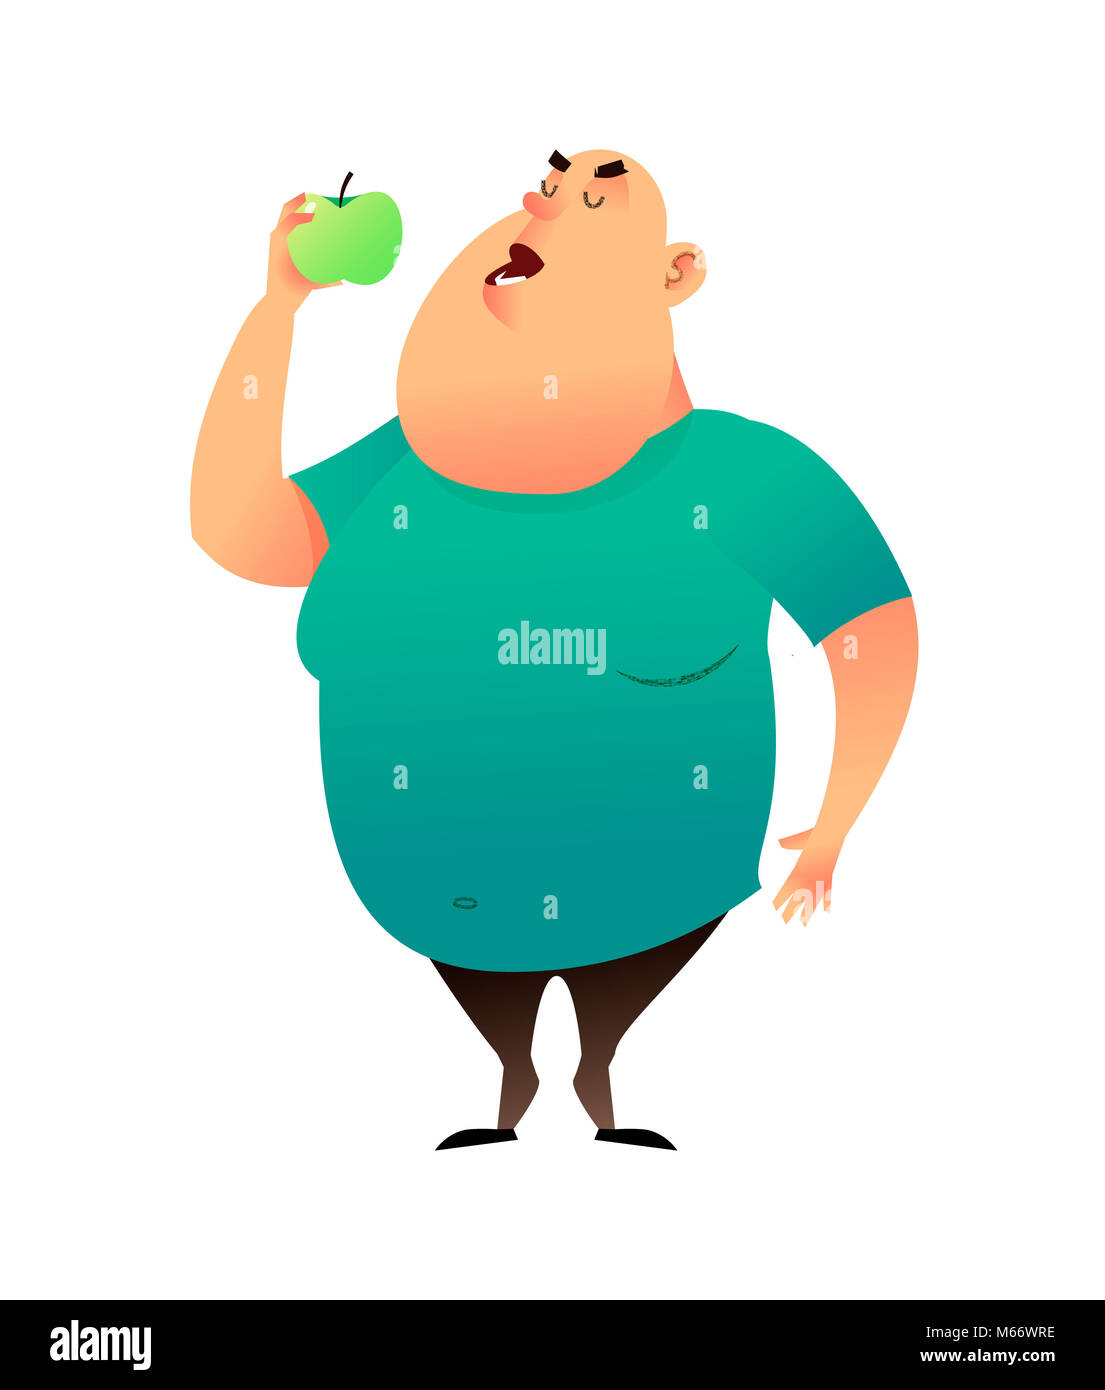 A fat man bites an apple. Useful habits and healthy eating concept. The fatty guy dreams of losing weight and chooses a healthy diet. Healthy lifestyle and proper nutrition lifestyle. Stock Photo